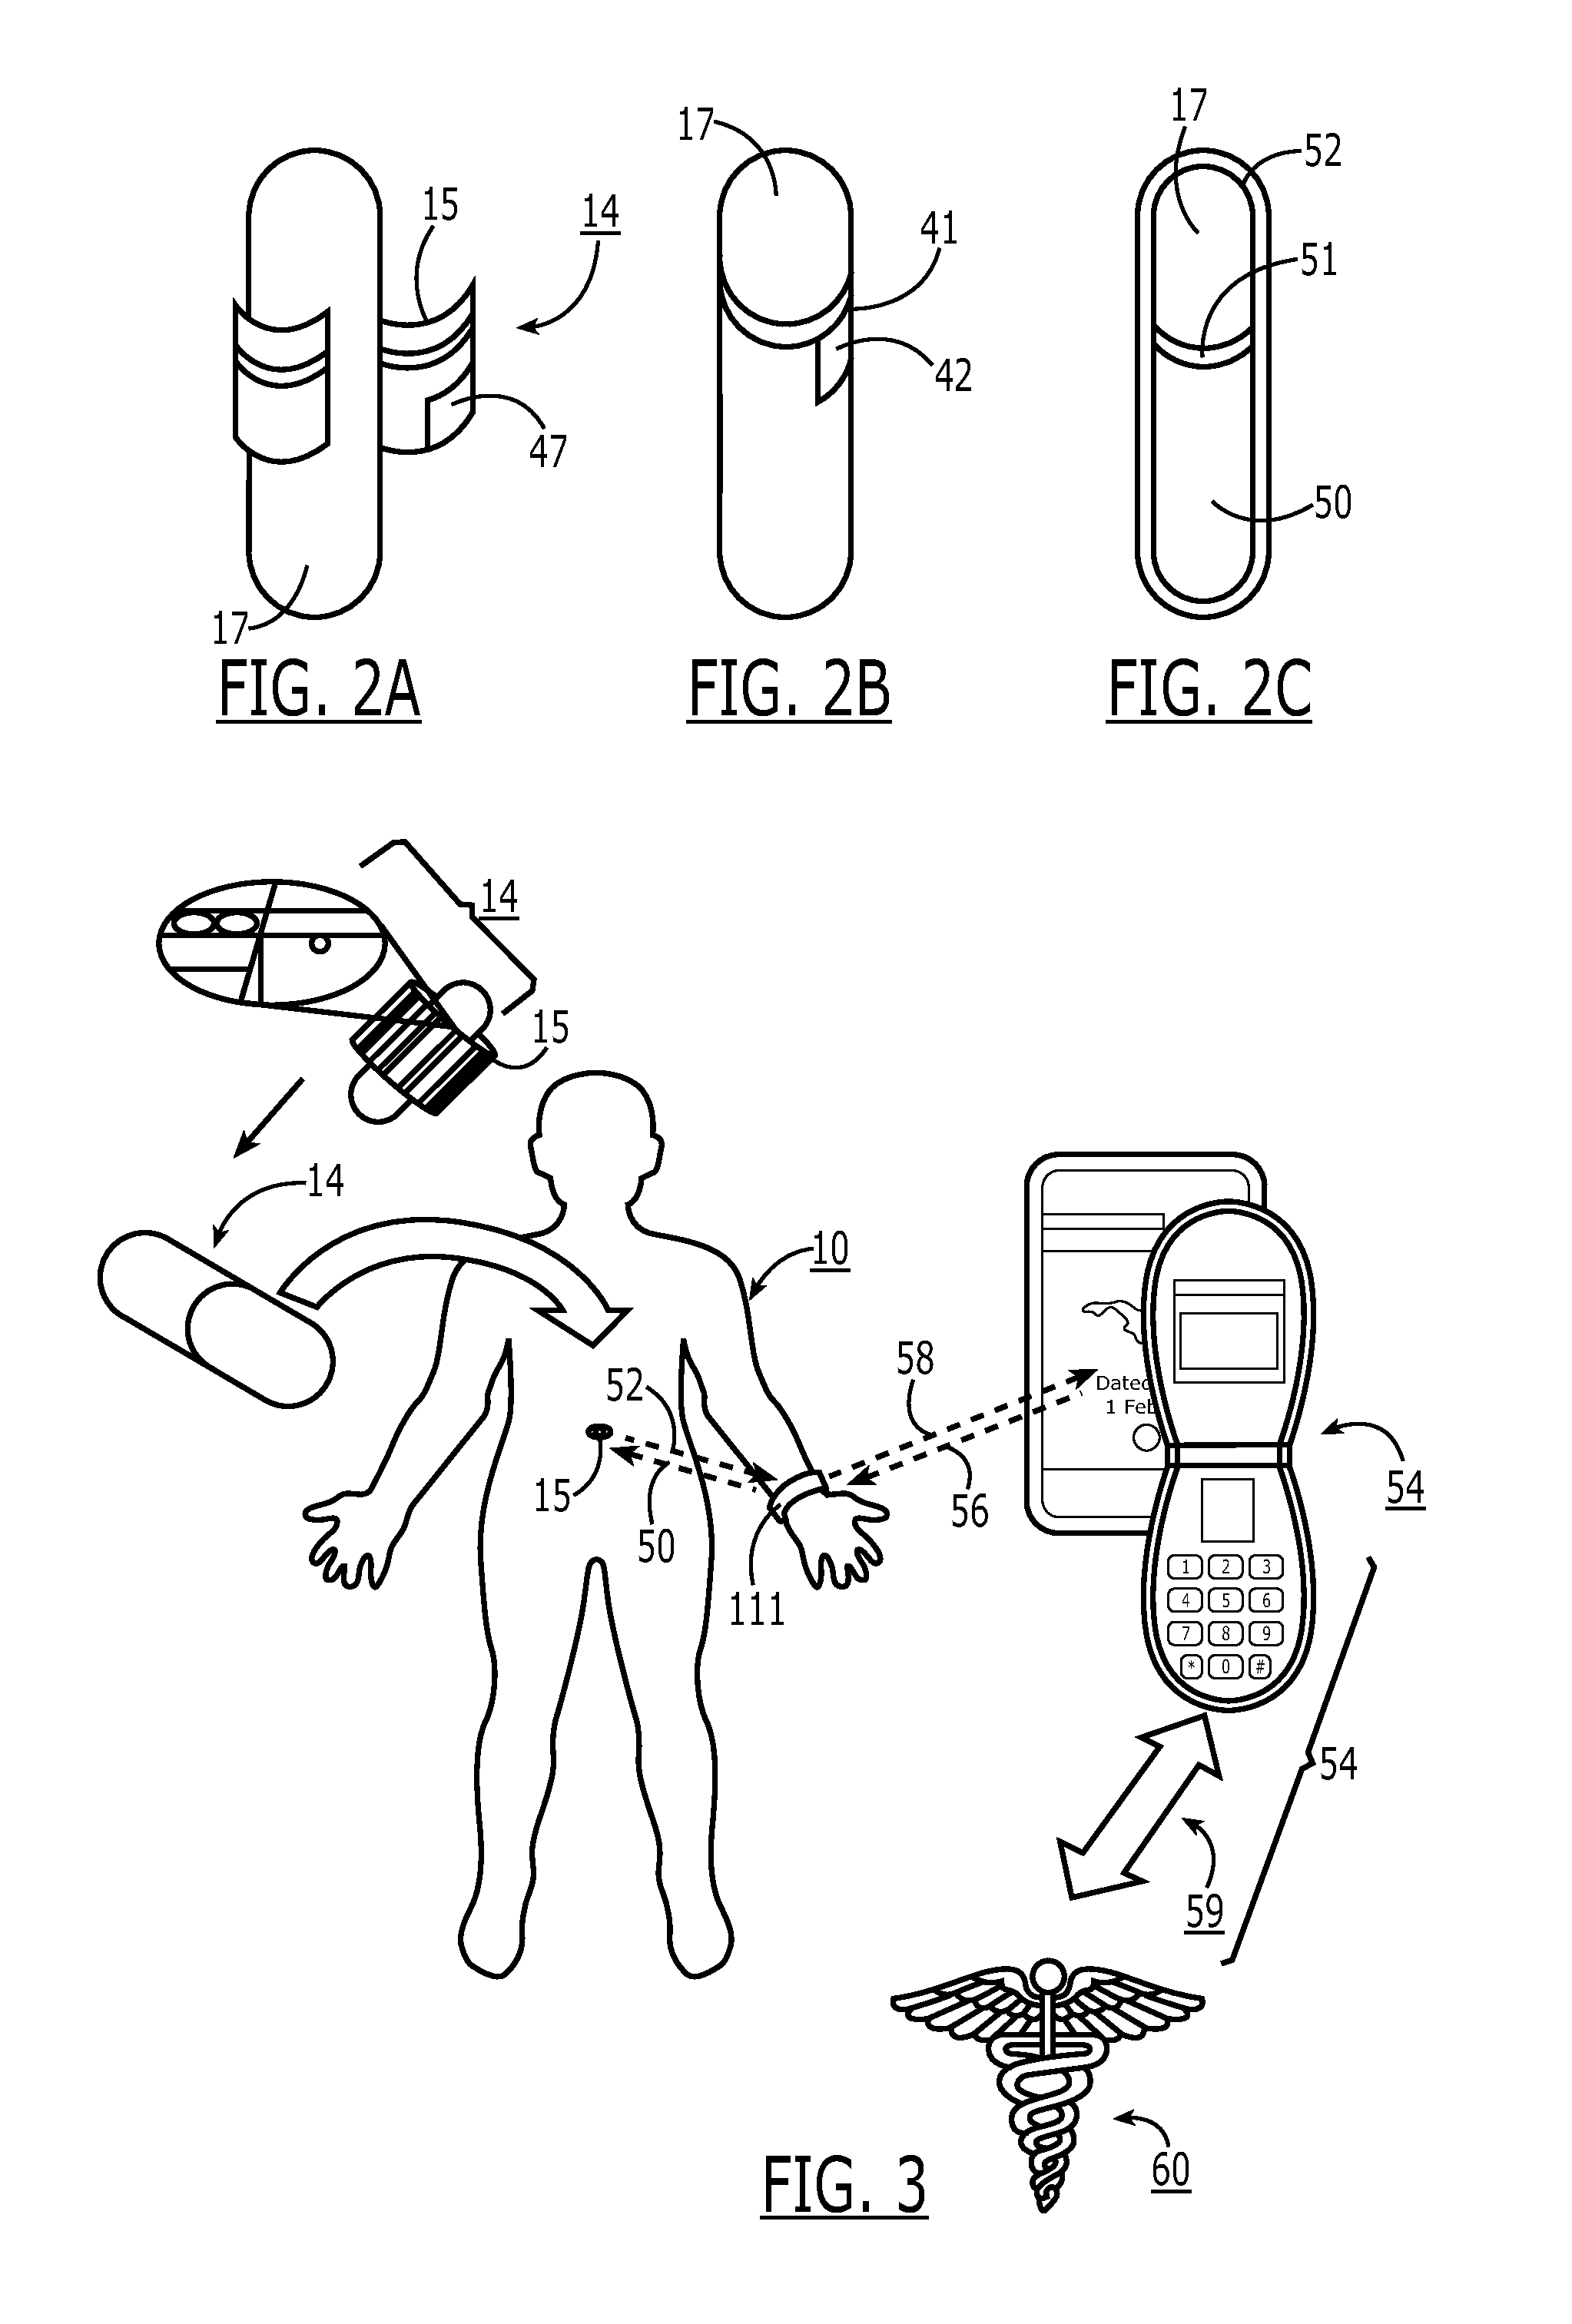 Electronic medication compliance monitoring system and associated methods